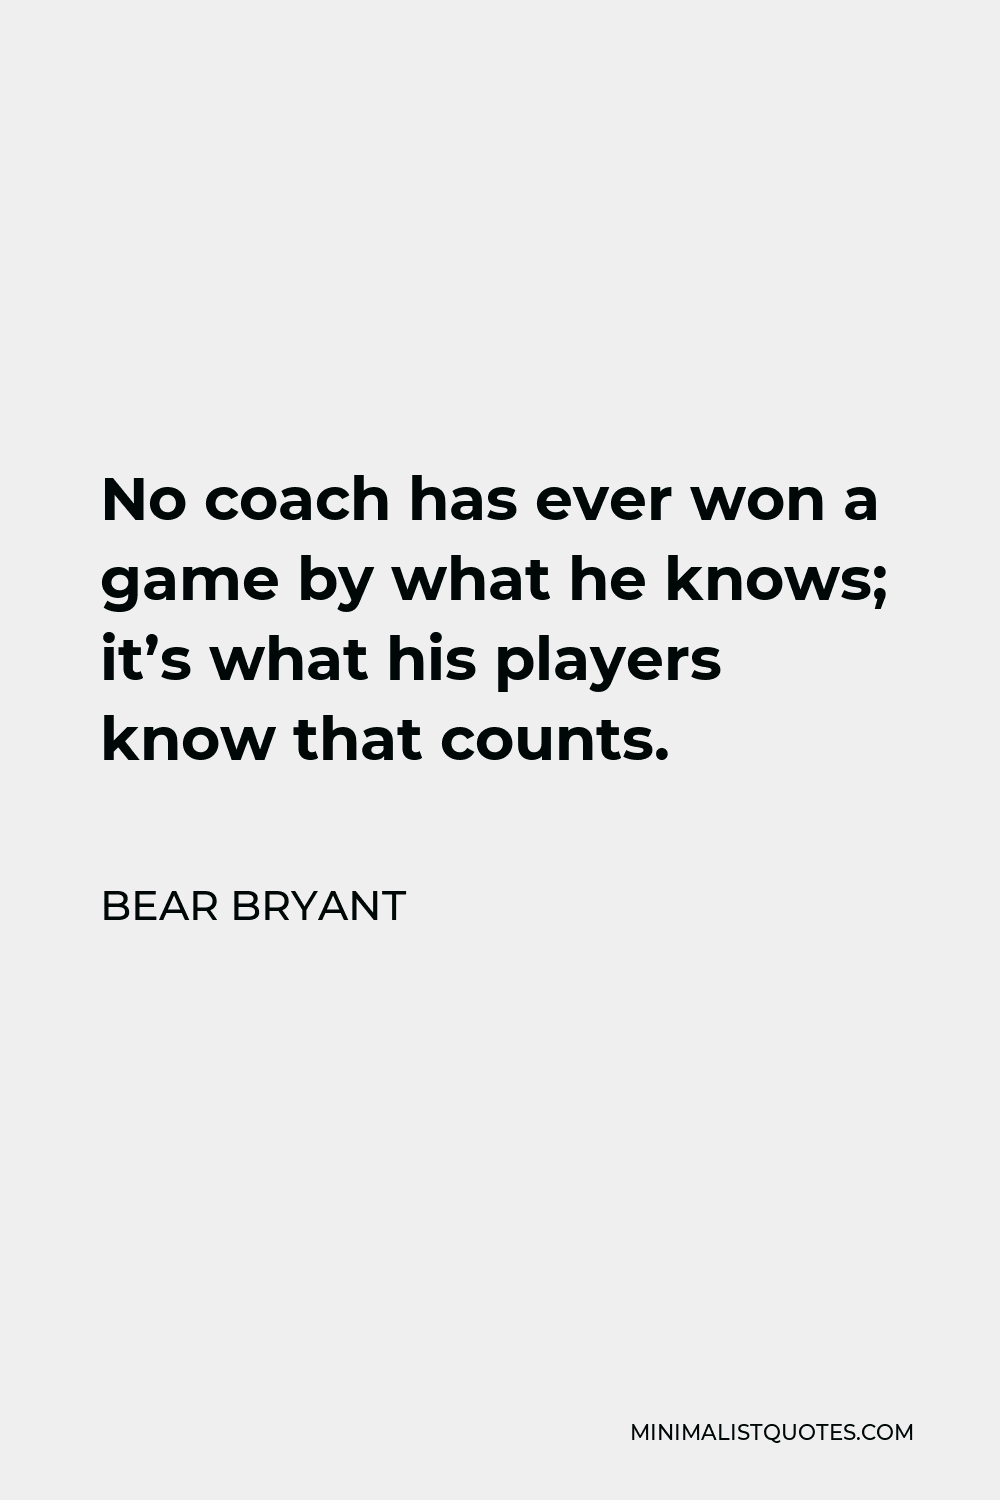 Bear Bryant Quote - No coach has ever won a game by what he knows; it’s what his players know that counts.